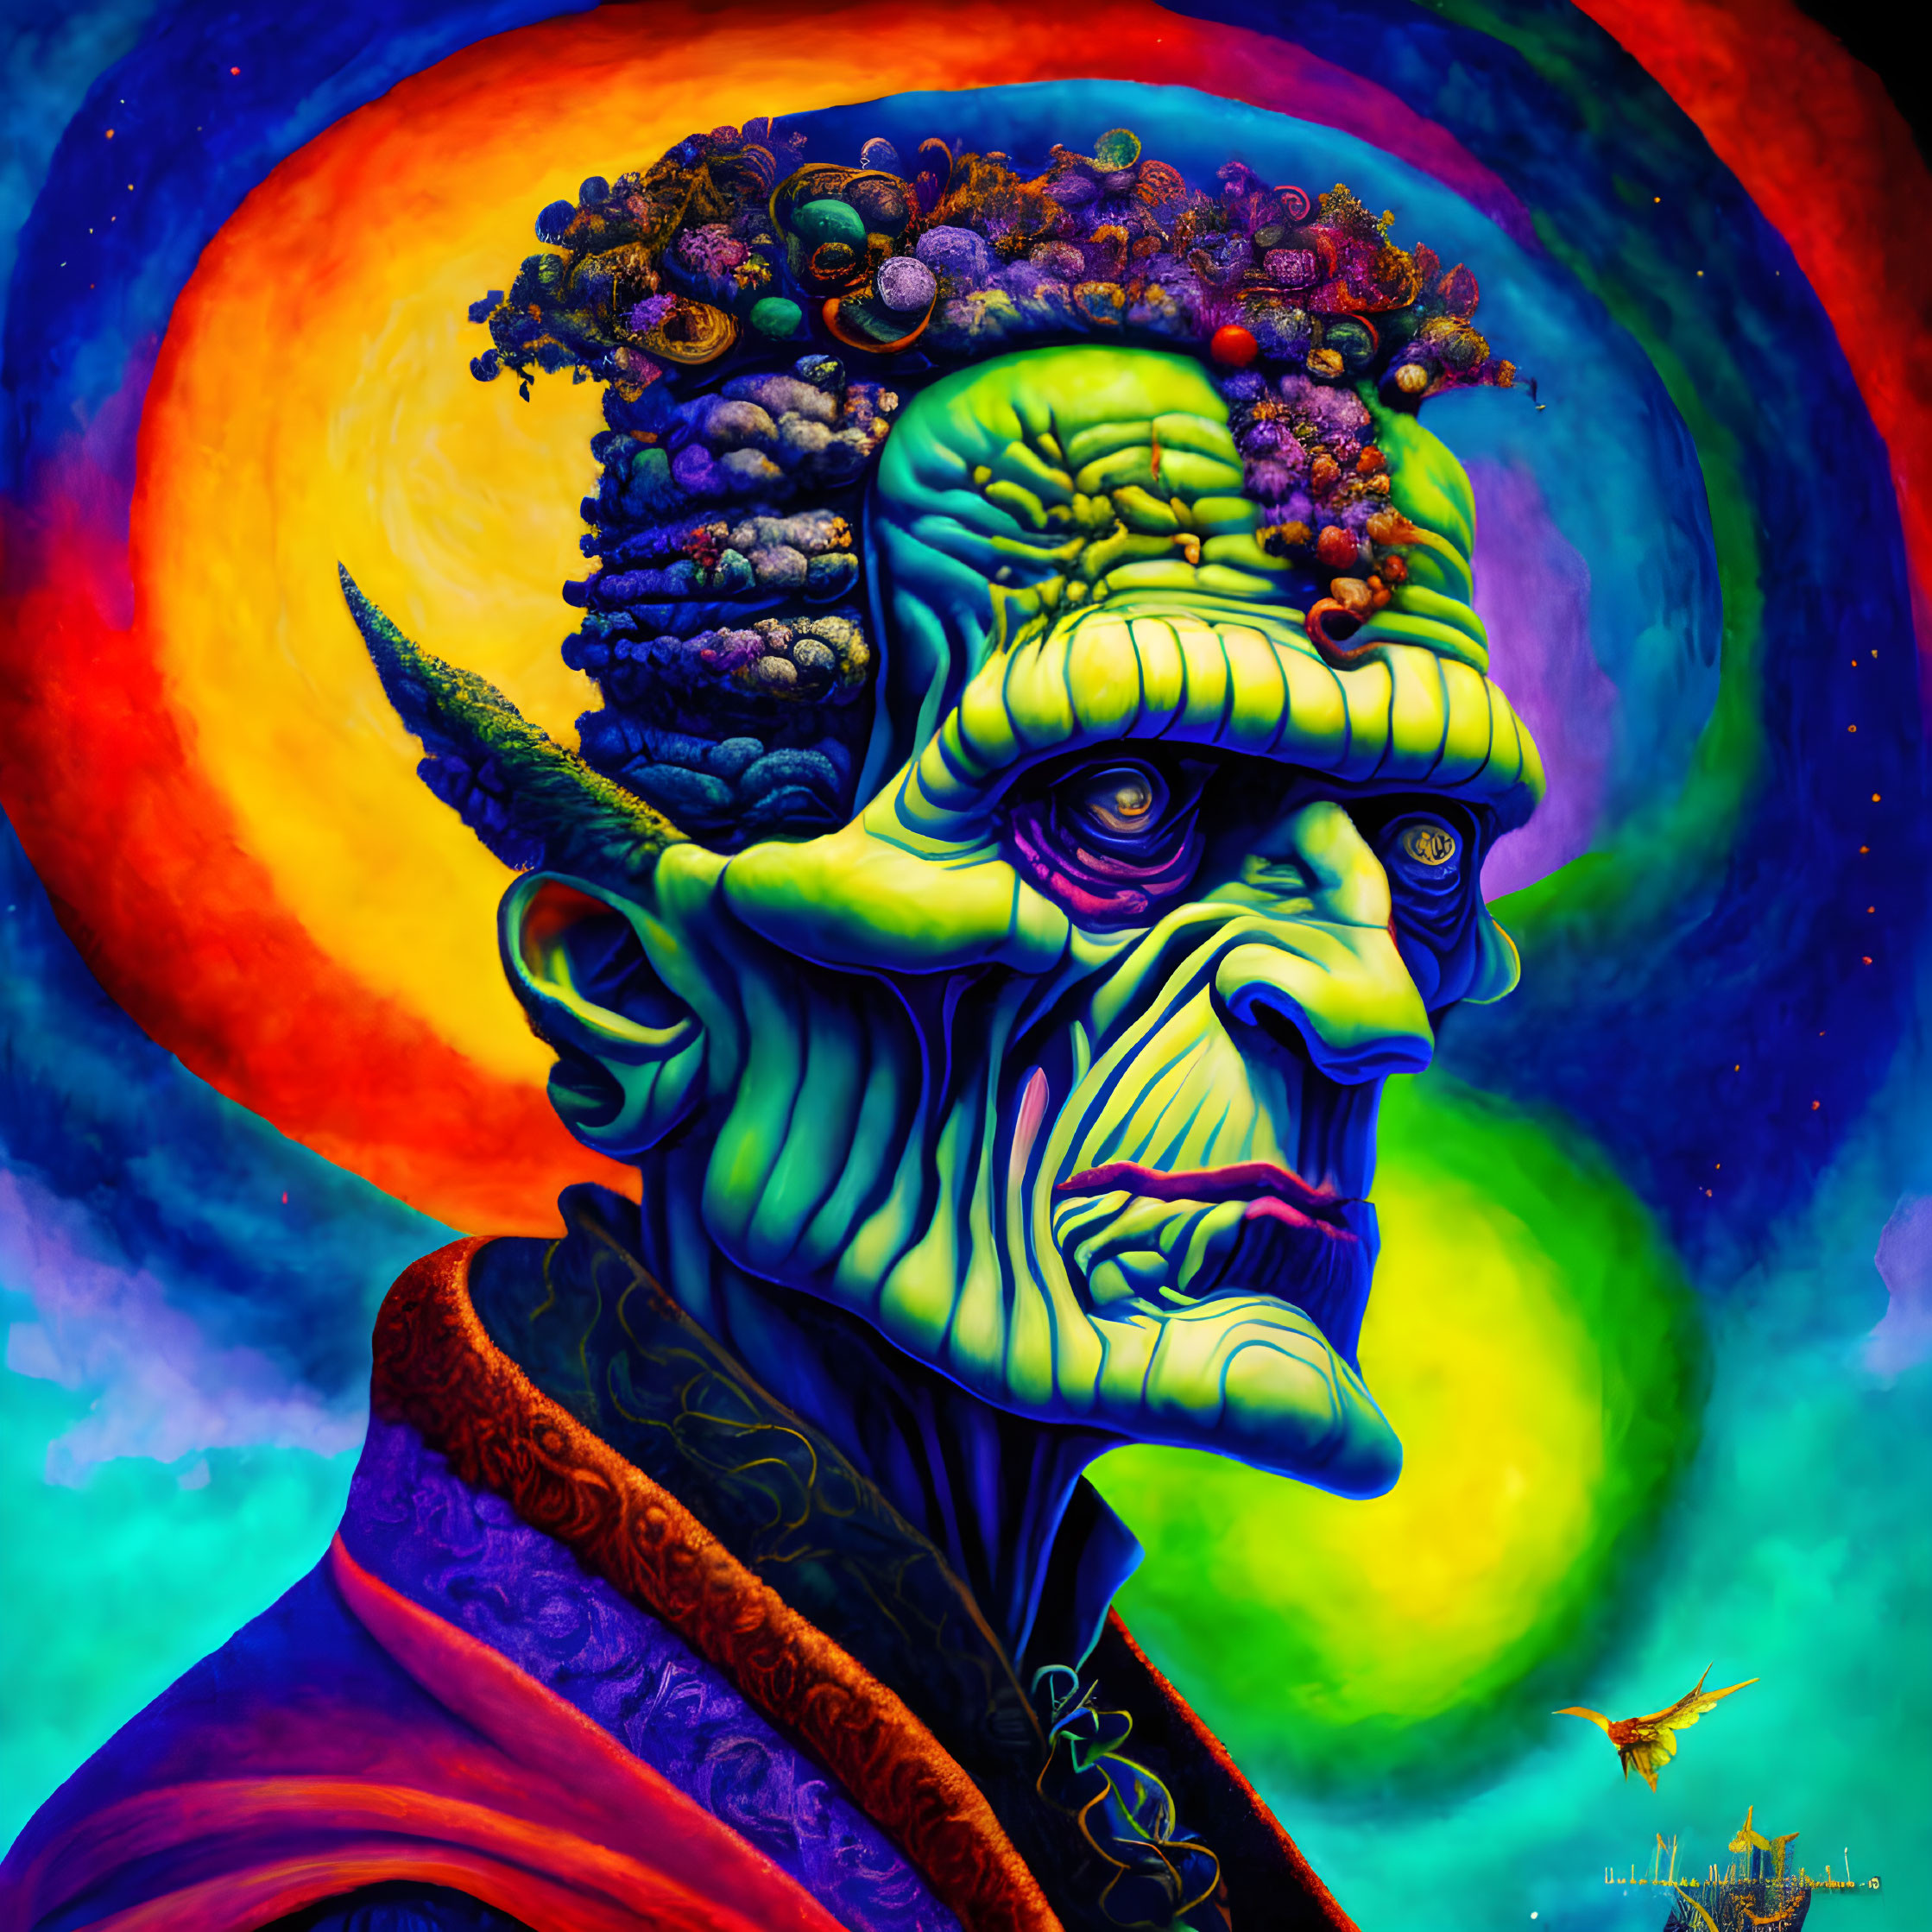 Colorful Psychedelic Portrait with Green-Skinned Character